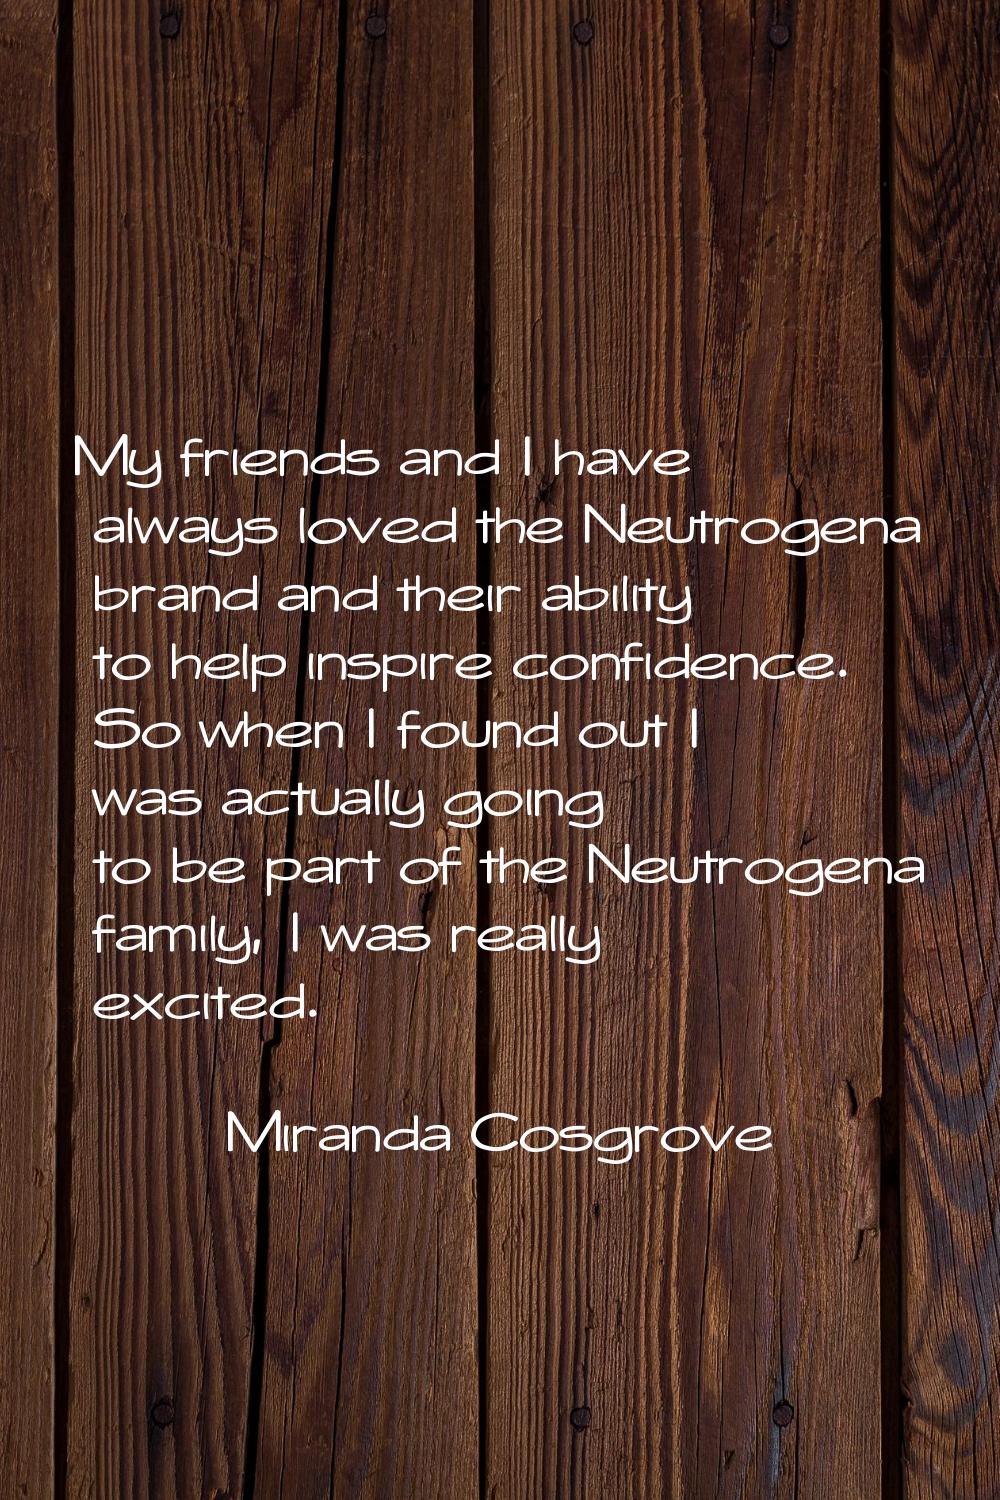 My friends and I have always loved the Neutrogena brand and their ability to help inspire confidenc